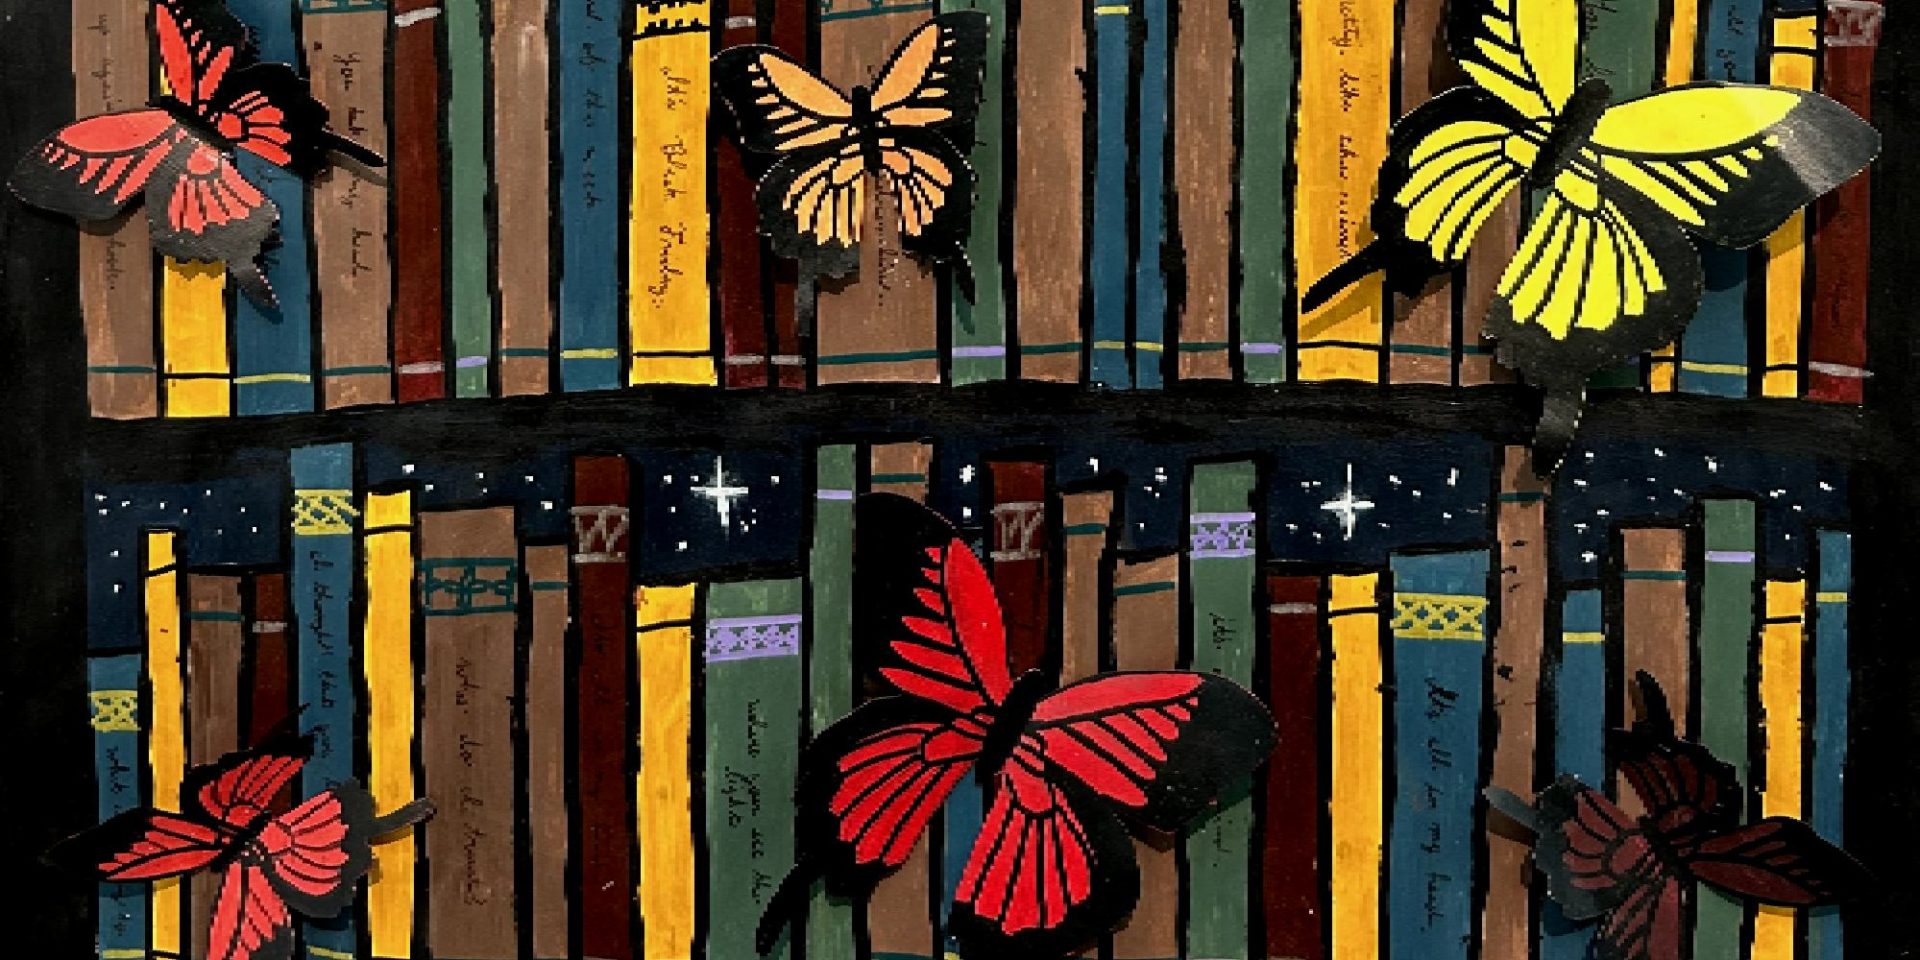 Colorful painting of library books with butterflies on the spines. Books are blue and yellow and maroon spines. The butterflies floating in front are yellow, red, tangerine, and pink.